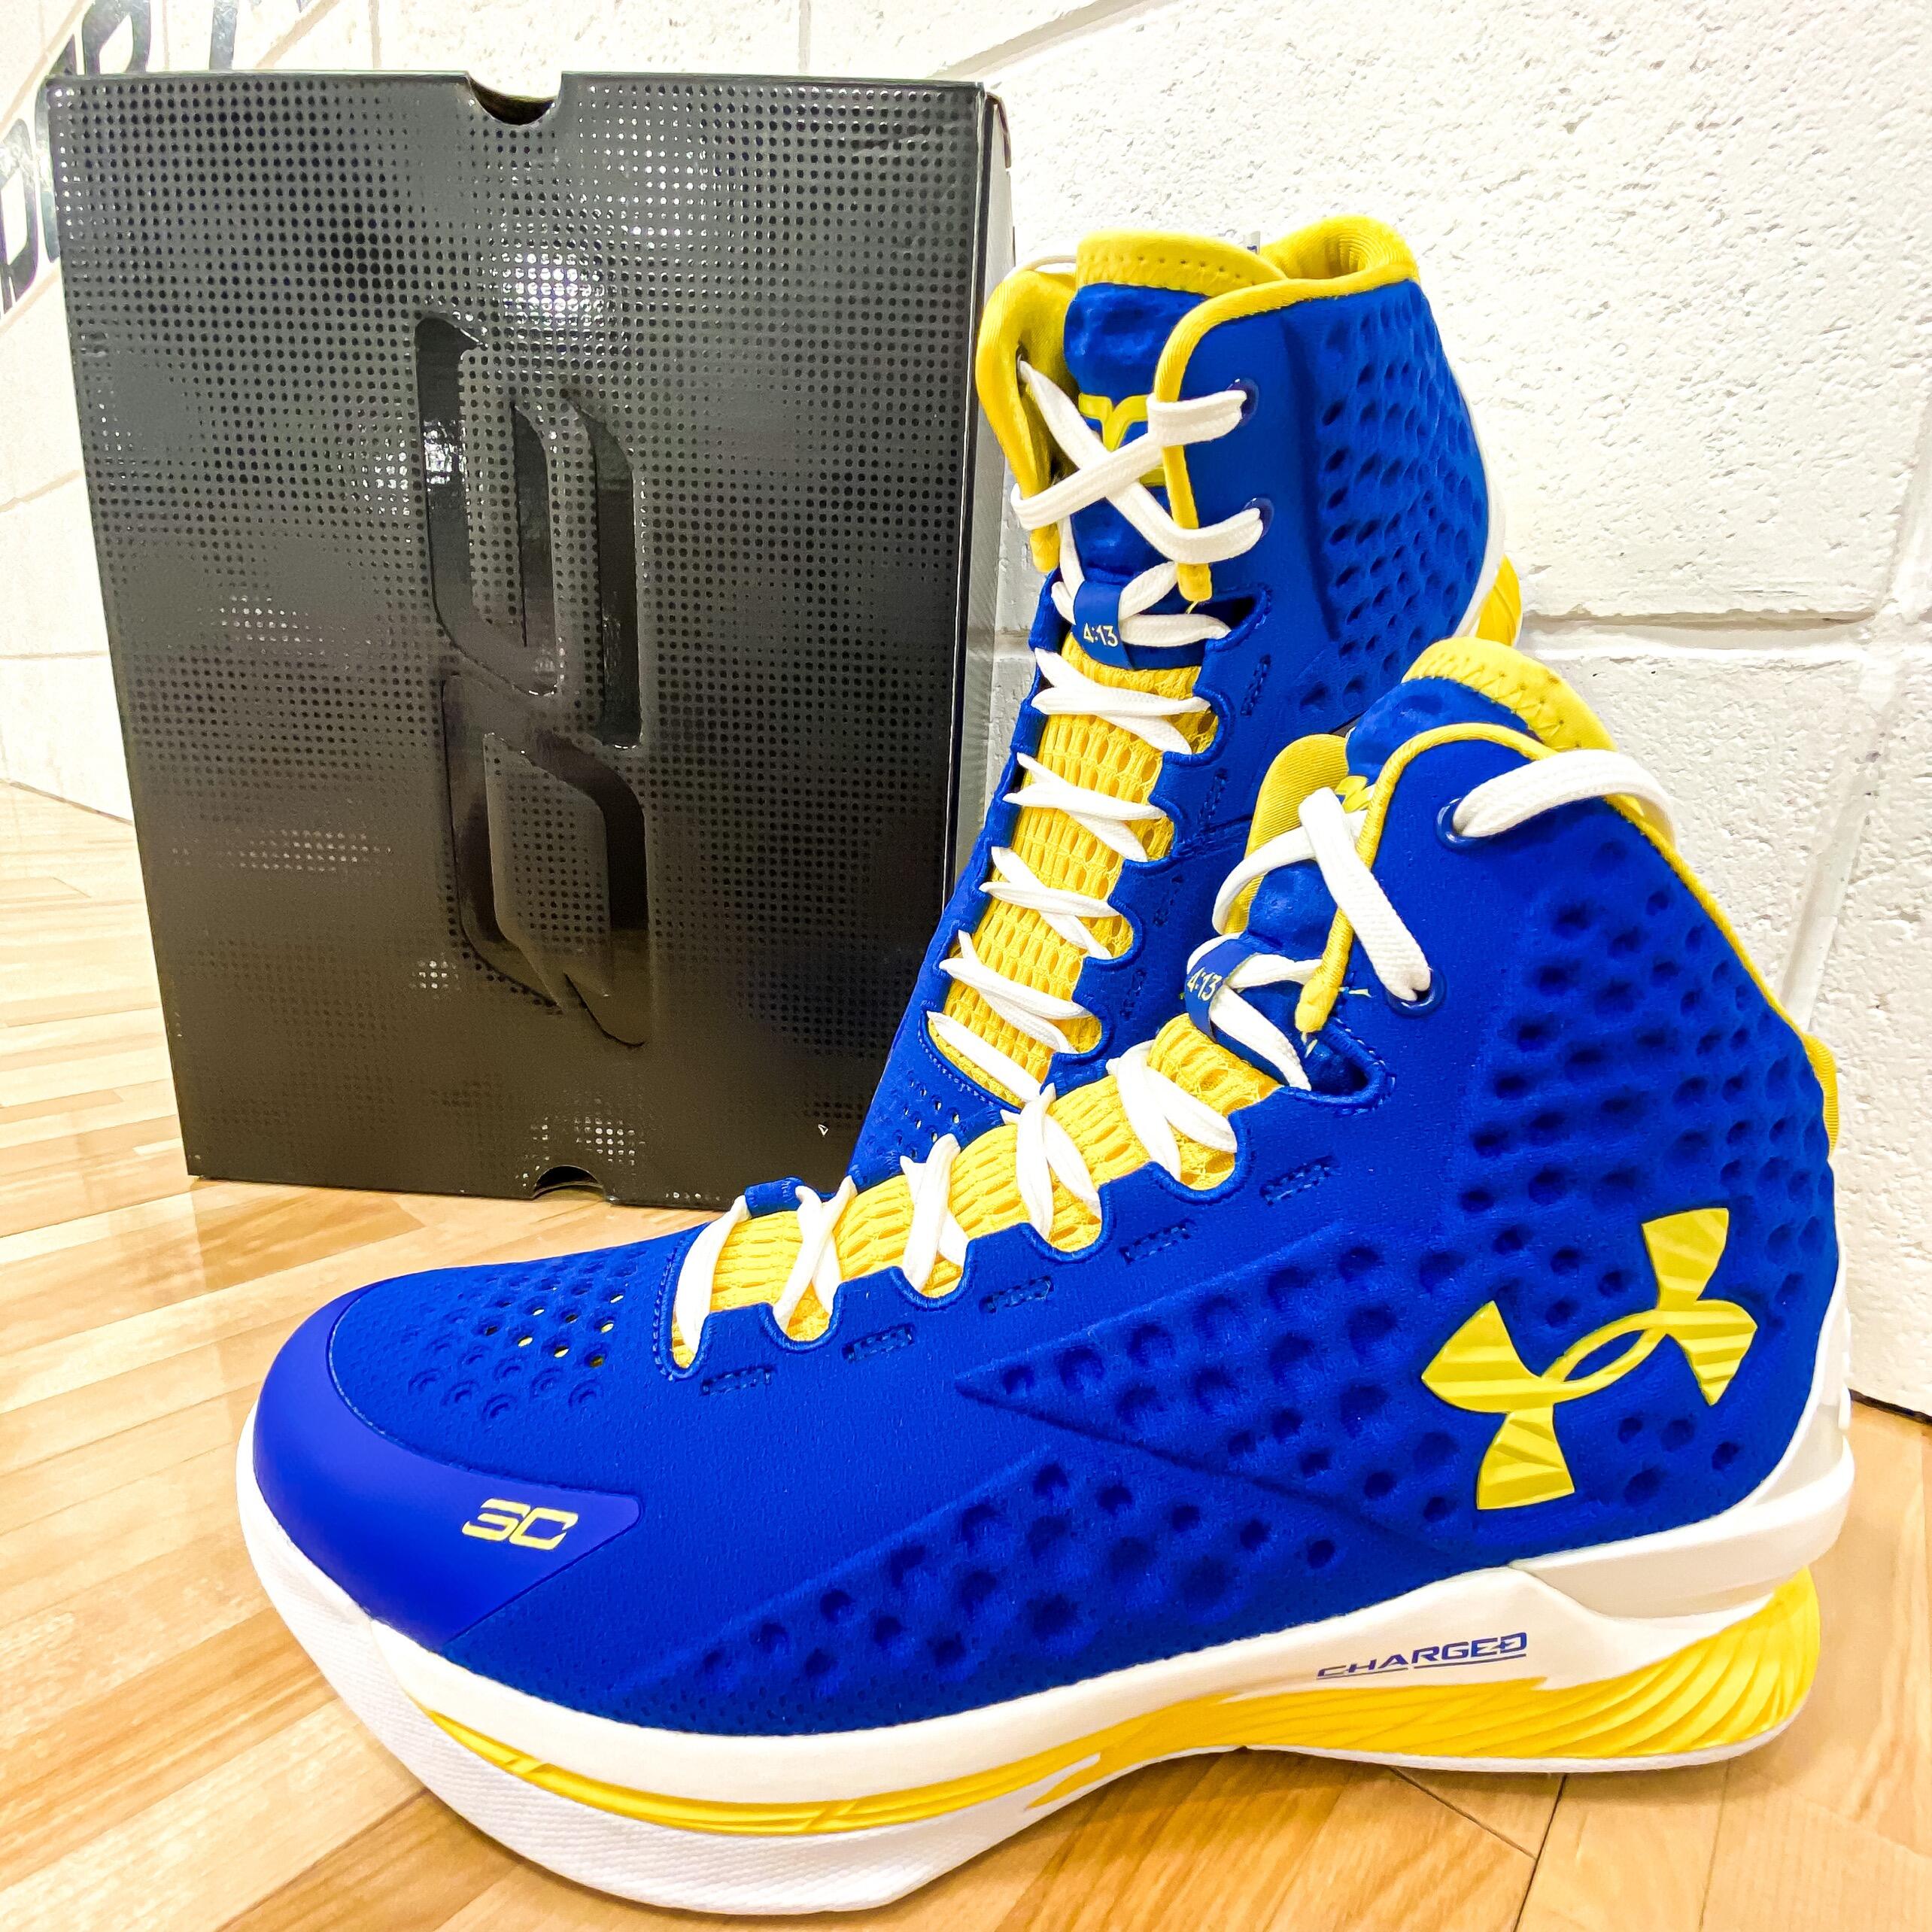 Curry1 DUB NATION AWAY | UNDER ARMOUR BRAND HOUSE 新宿 | SHOP BLOG ...